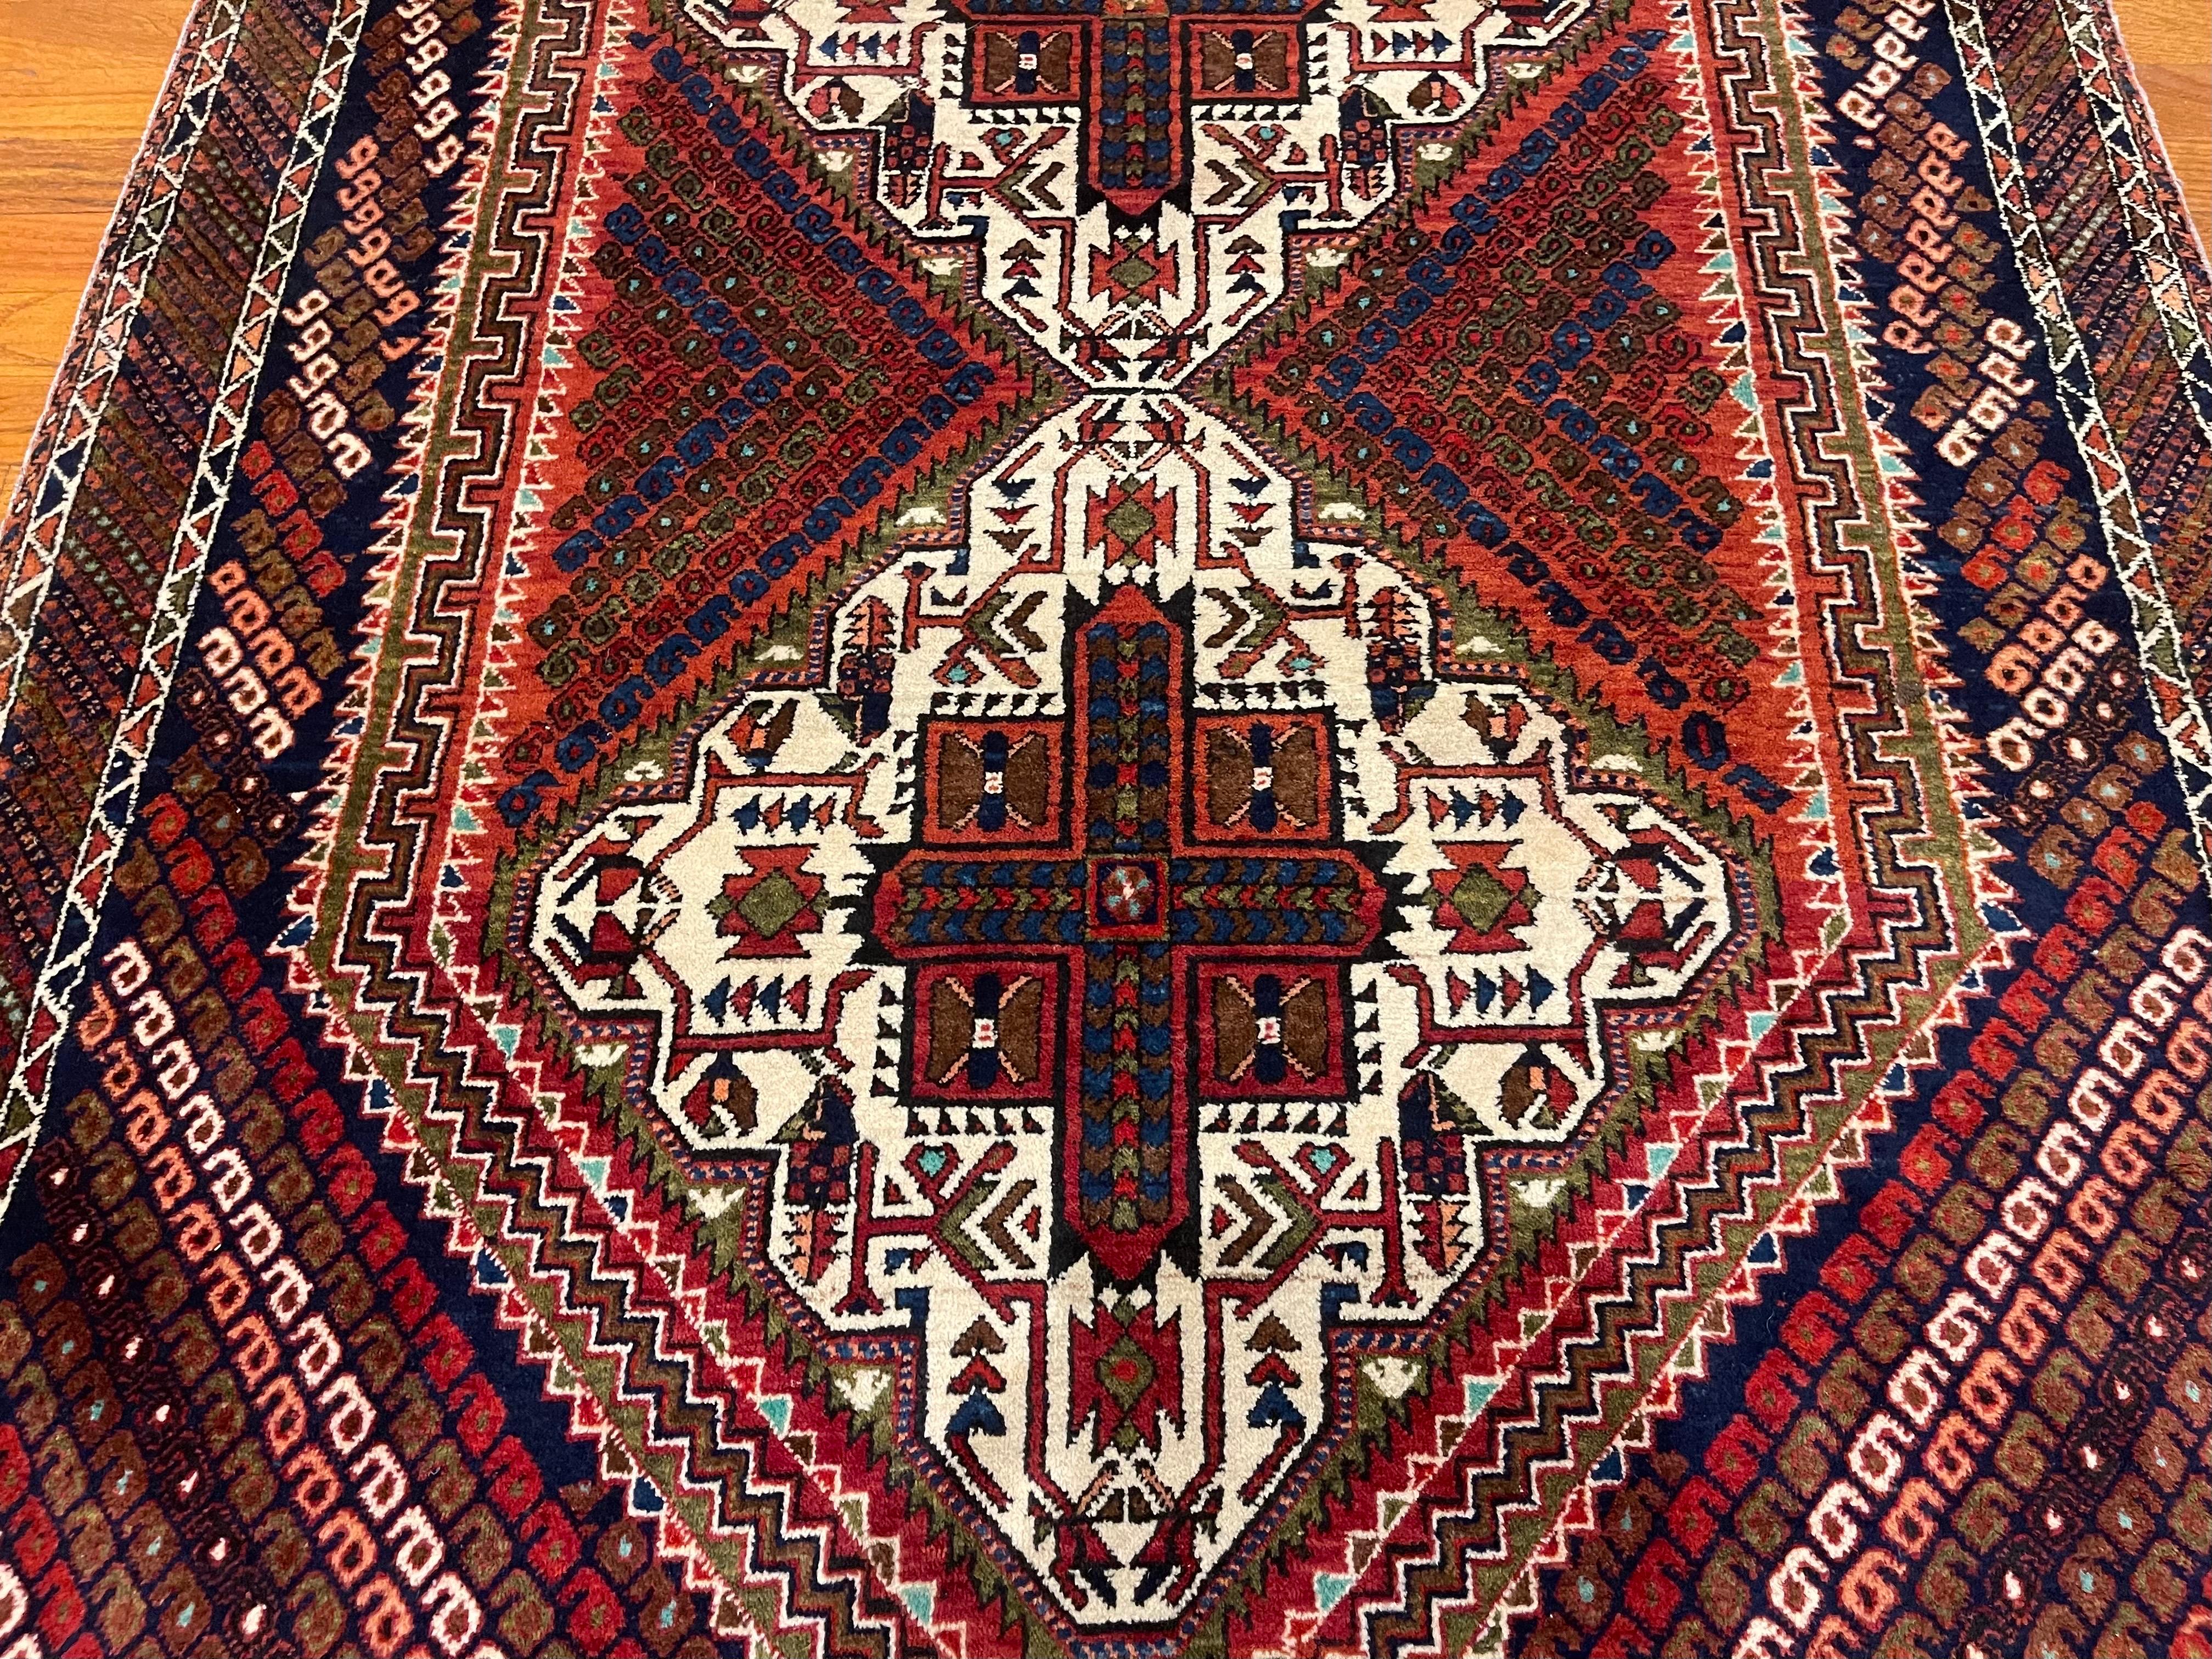 This rug is an authentic rug from Iran. Afshars are tribal rugs that are hand woven by the Afshar people in southern Iran. The pile is wool and foundation is cotton. The base color is a cream with accents of rust, green, blue and brown throughout